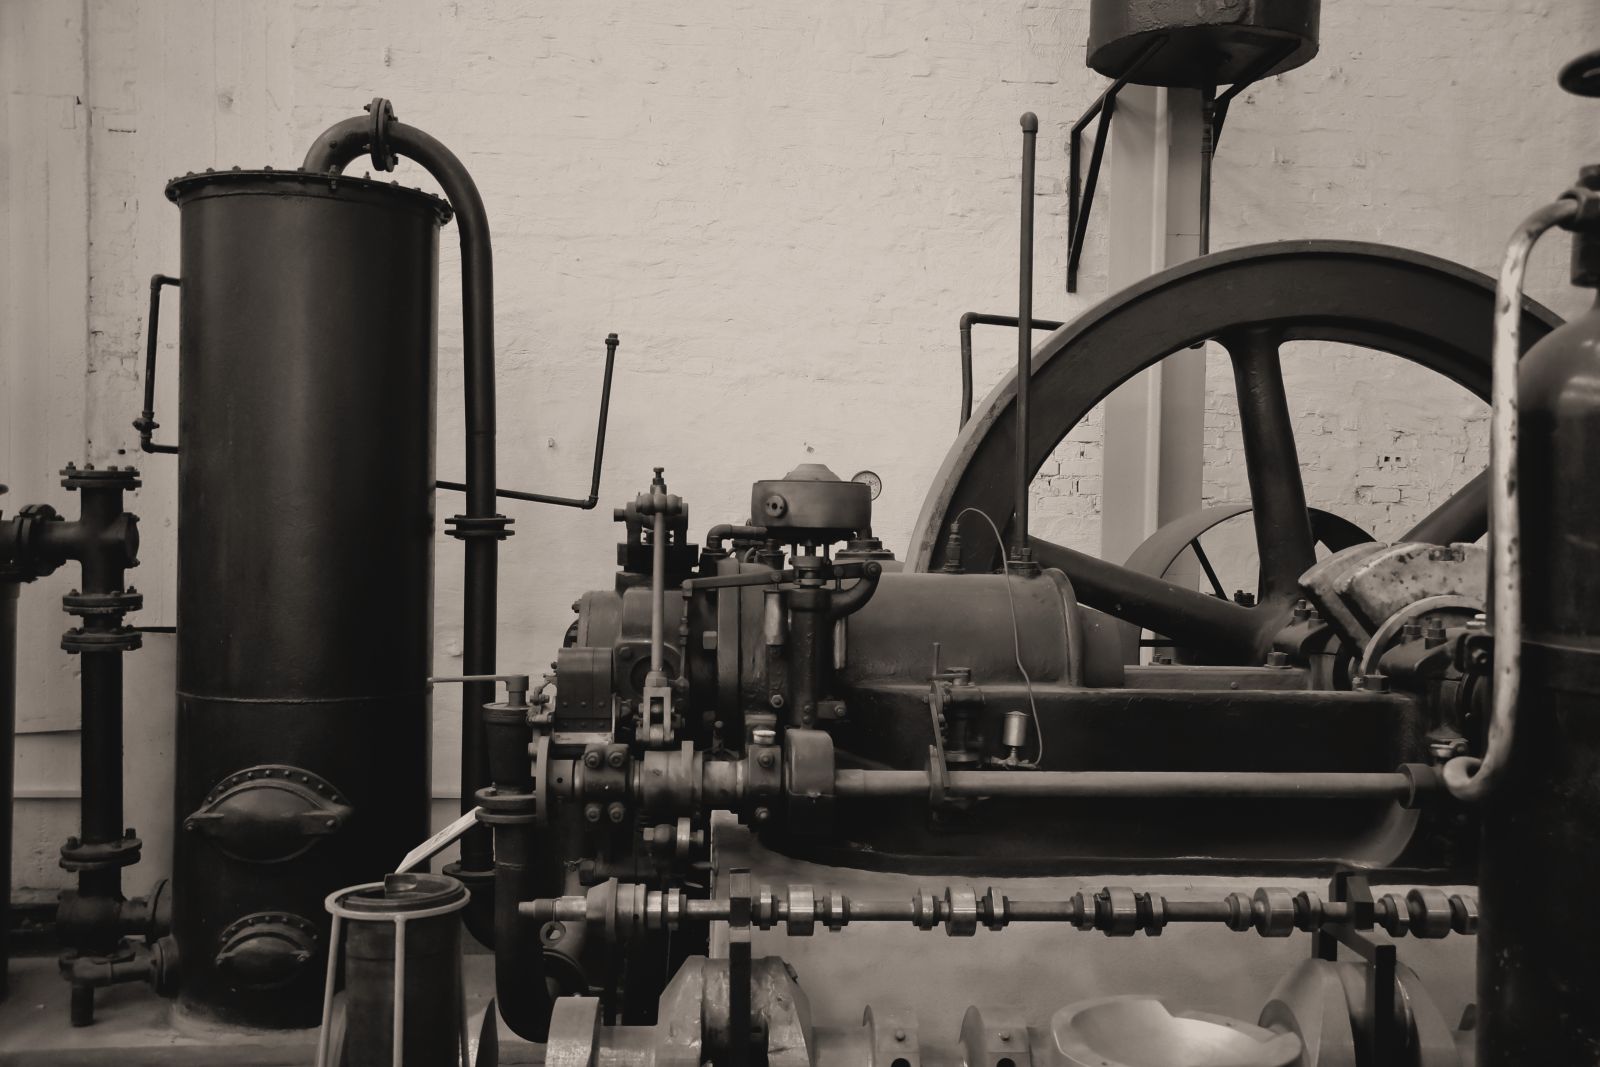 history of steam boilers